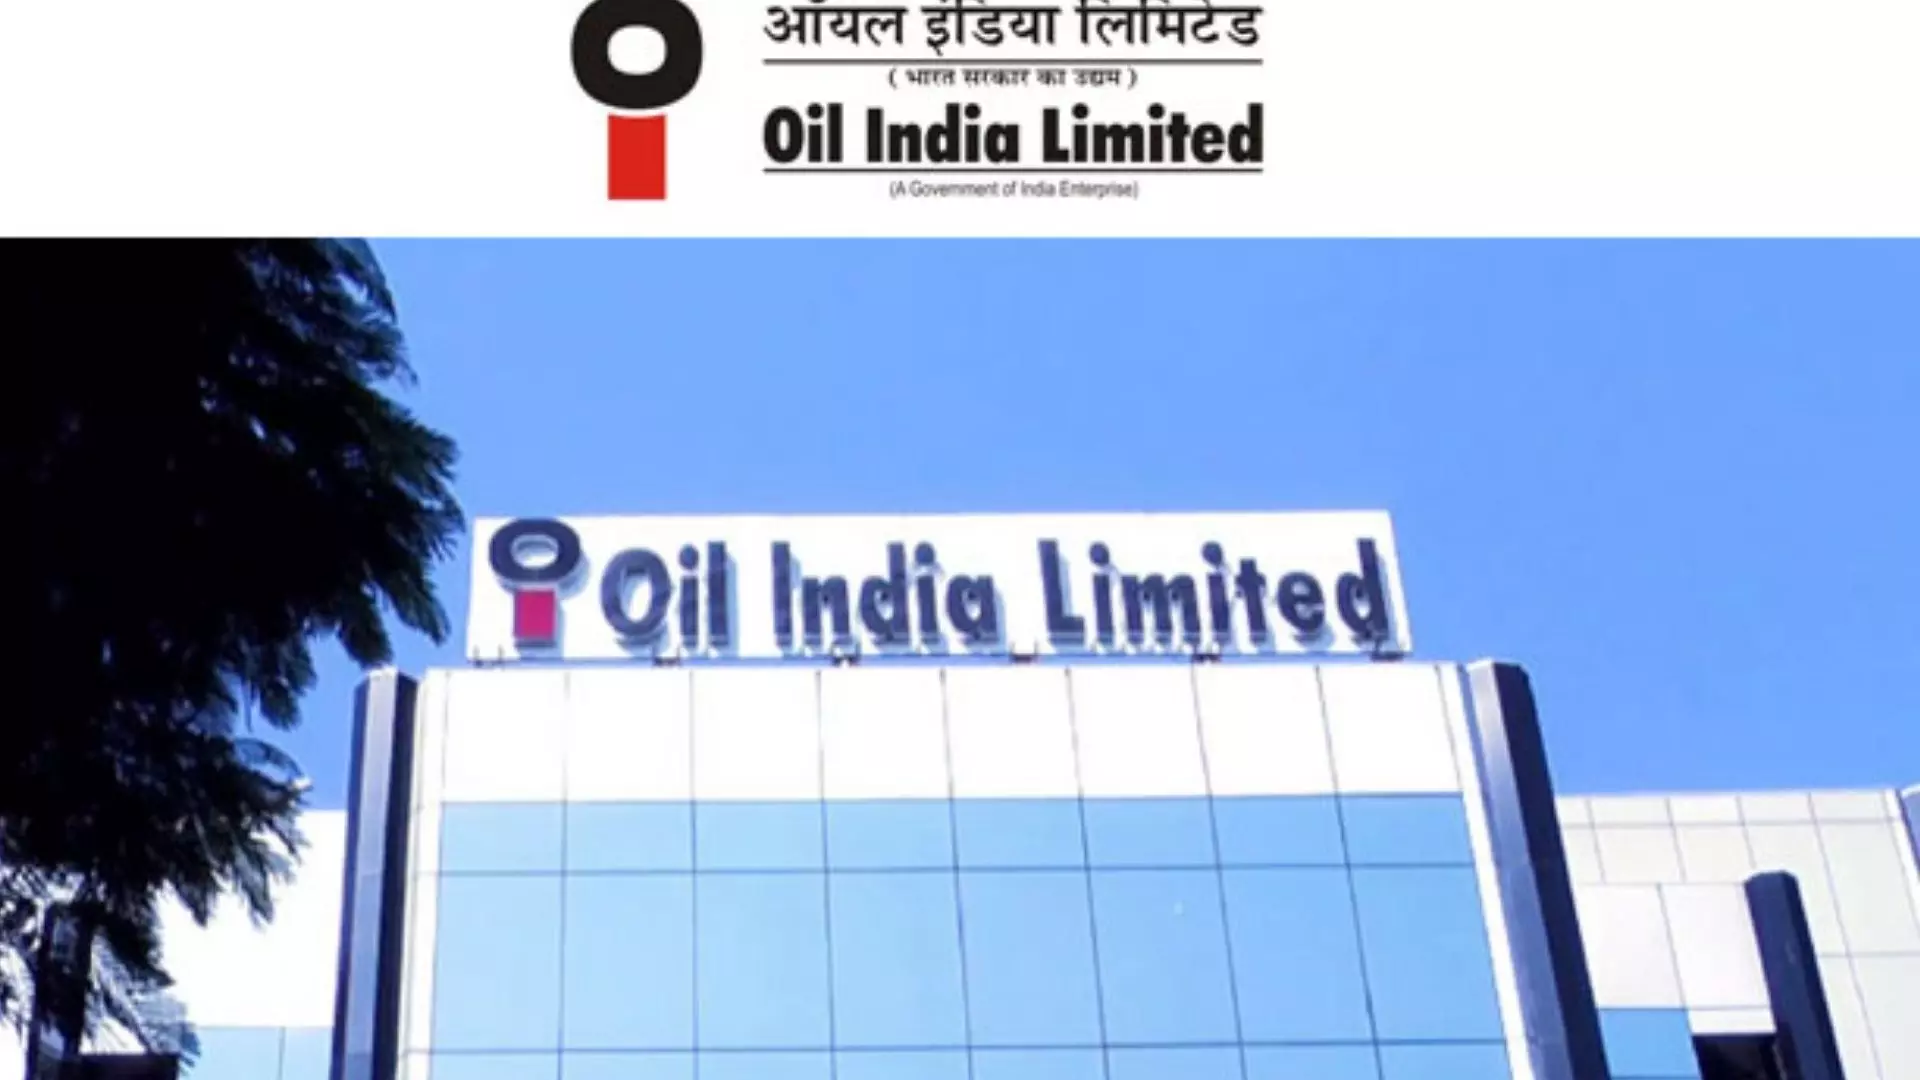 oil india limited junior assistant recruitment 2021 notification released